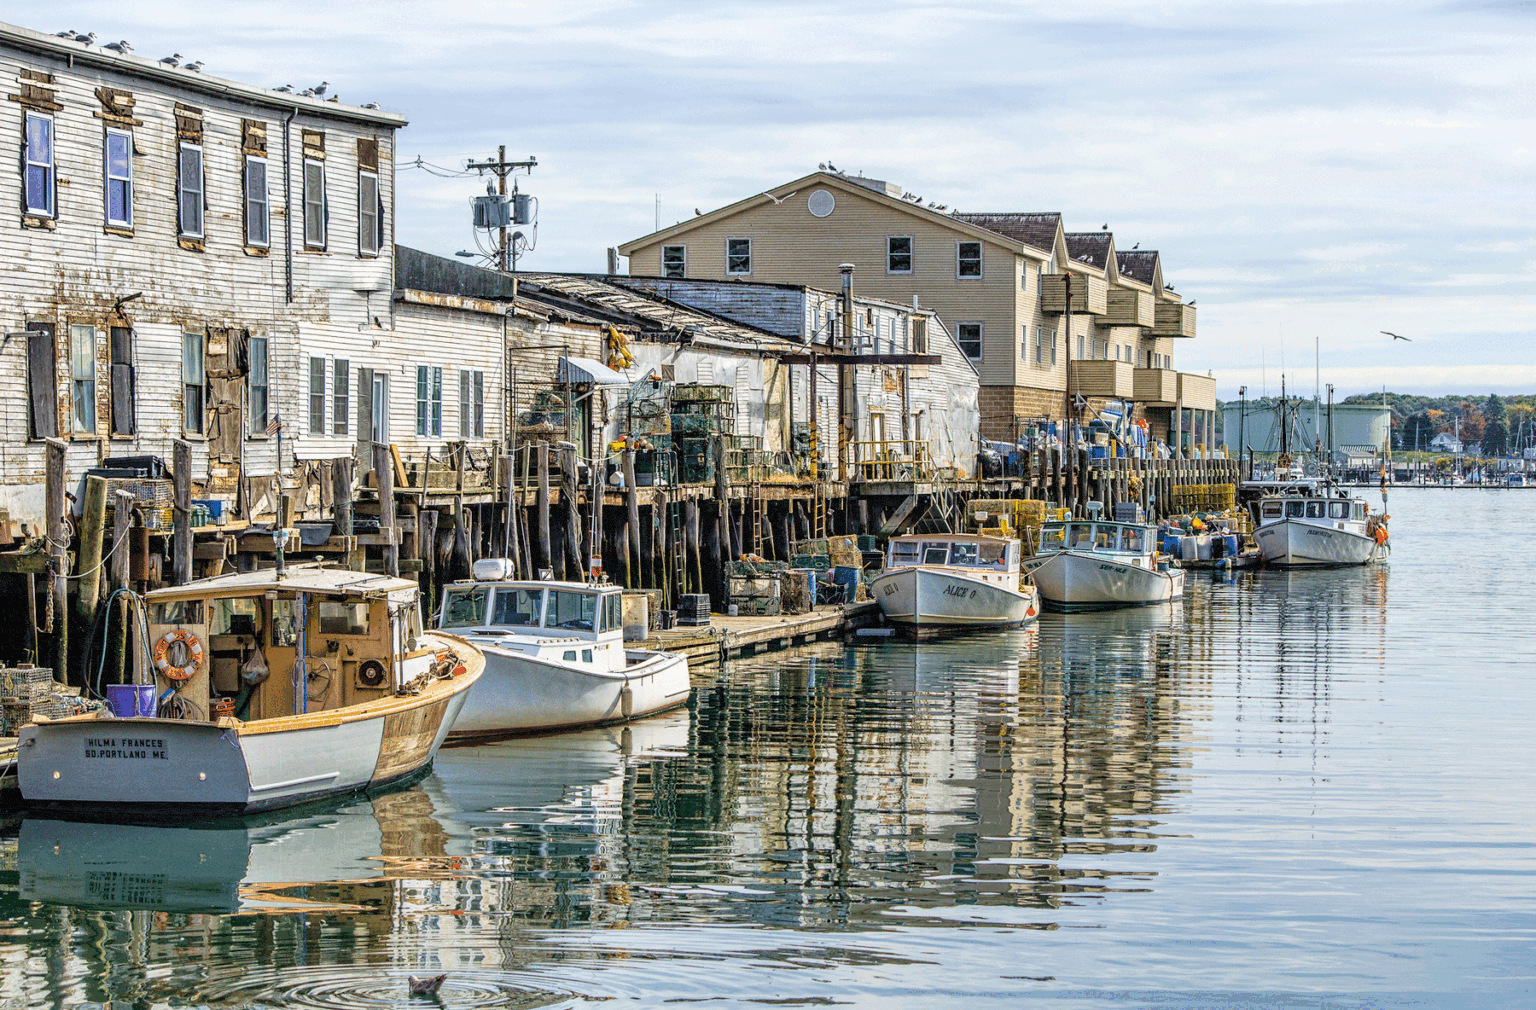 Boats along the pier in Portland, Maine. Photo by iStock